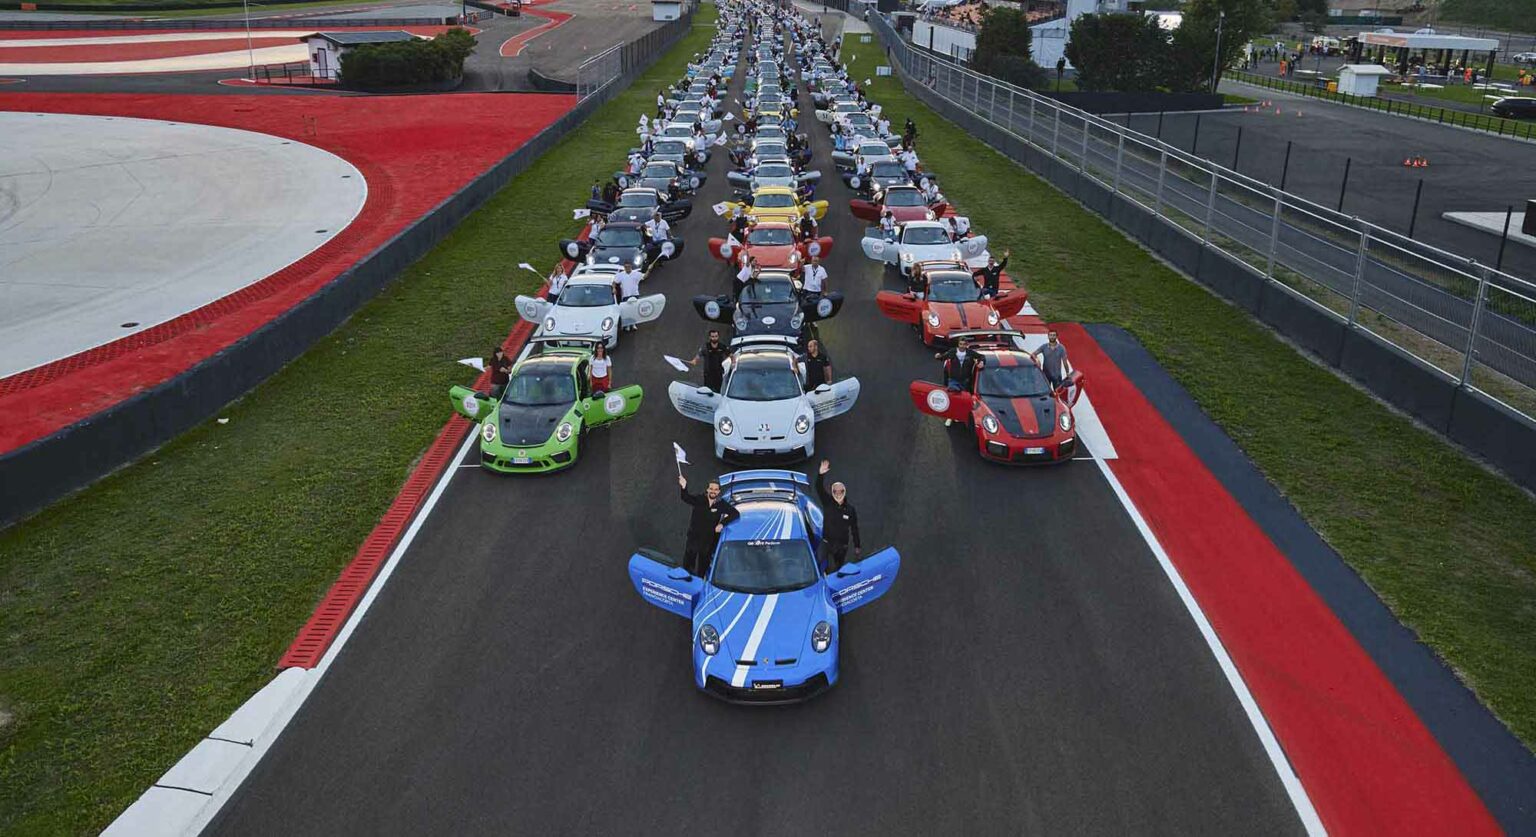 BARGNANA, ITALY - OCTOBER 02: A general view during Porsche Festival 2021 on October 02, 2021 in Bargnana, Italy. (Photo by Guido De Bortoli/Getty Images for Porsche Italia)